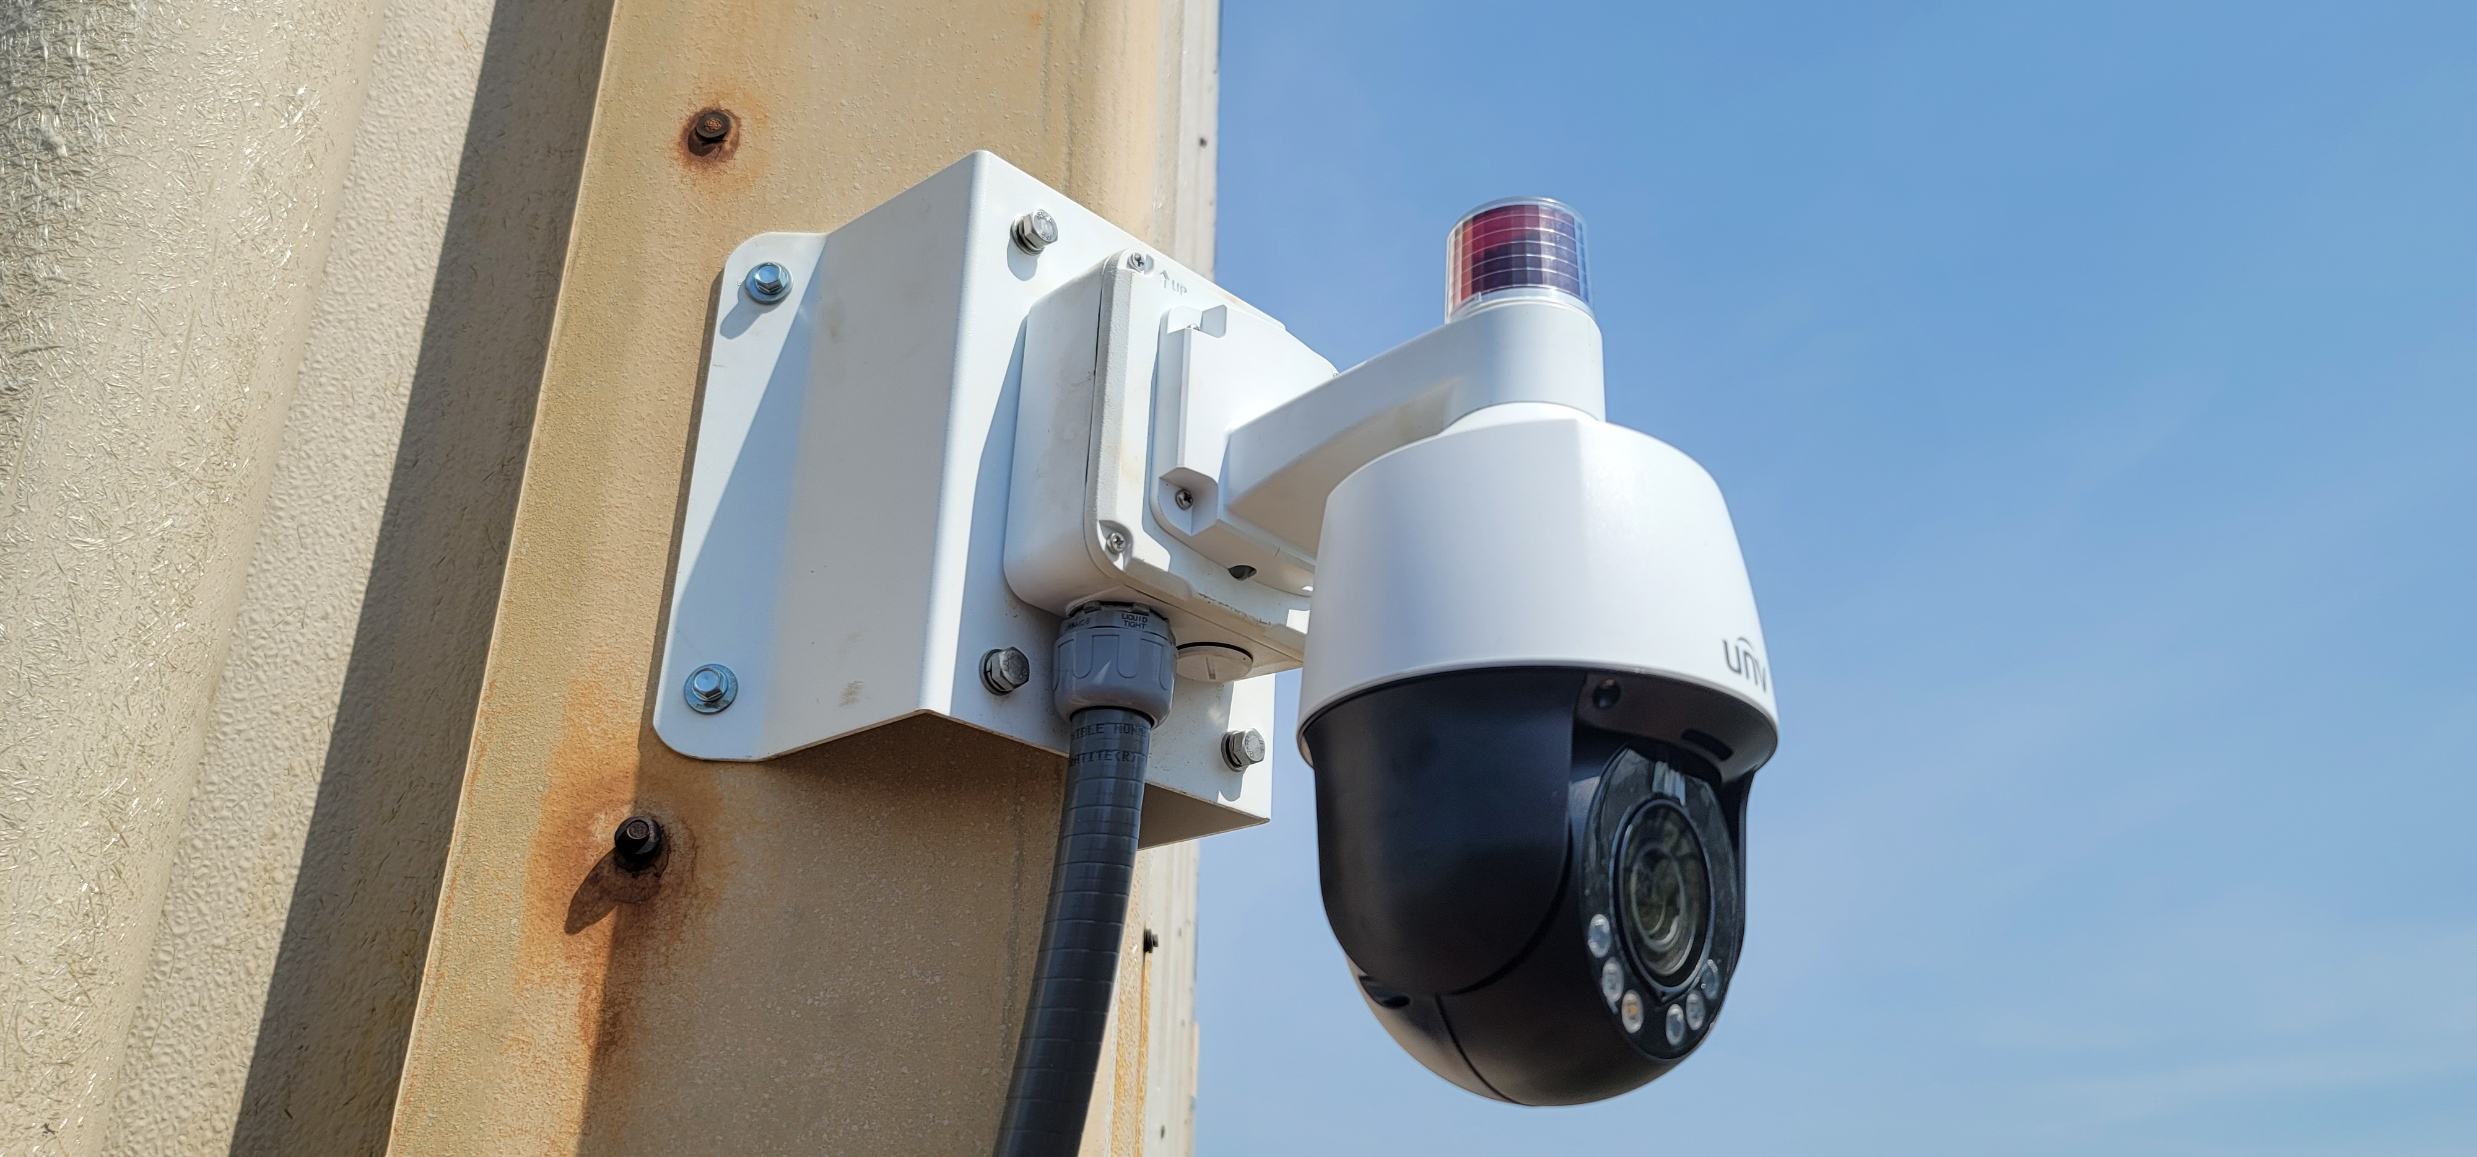 What is a Surveillance System?